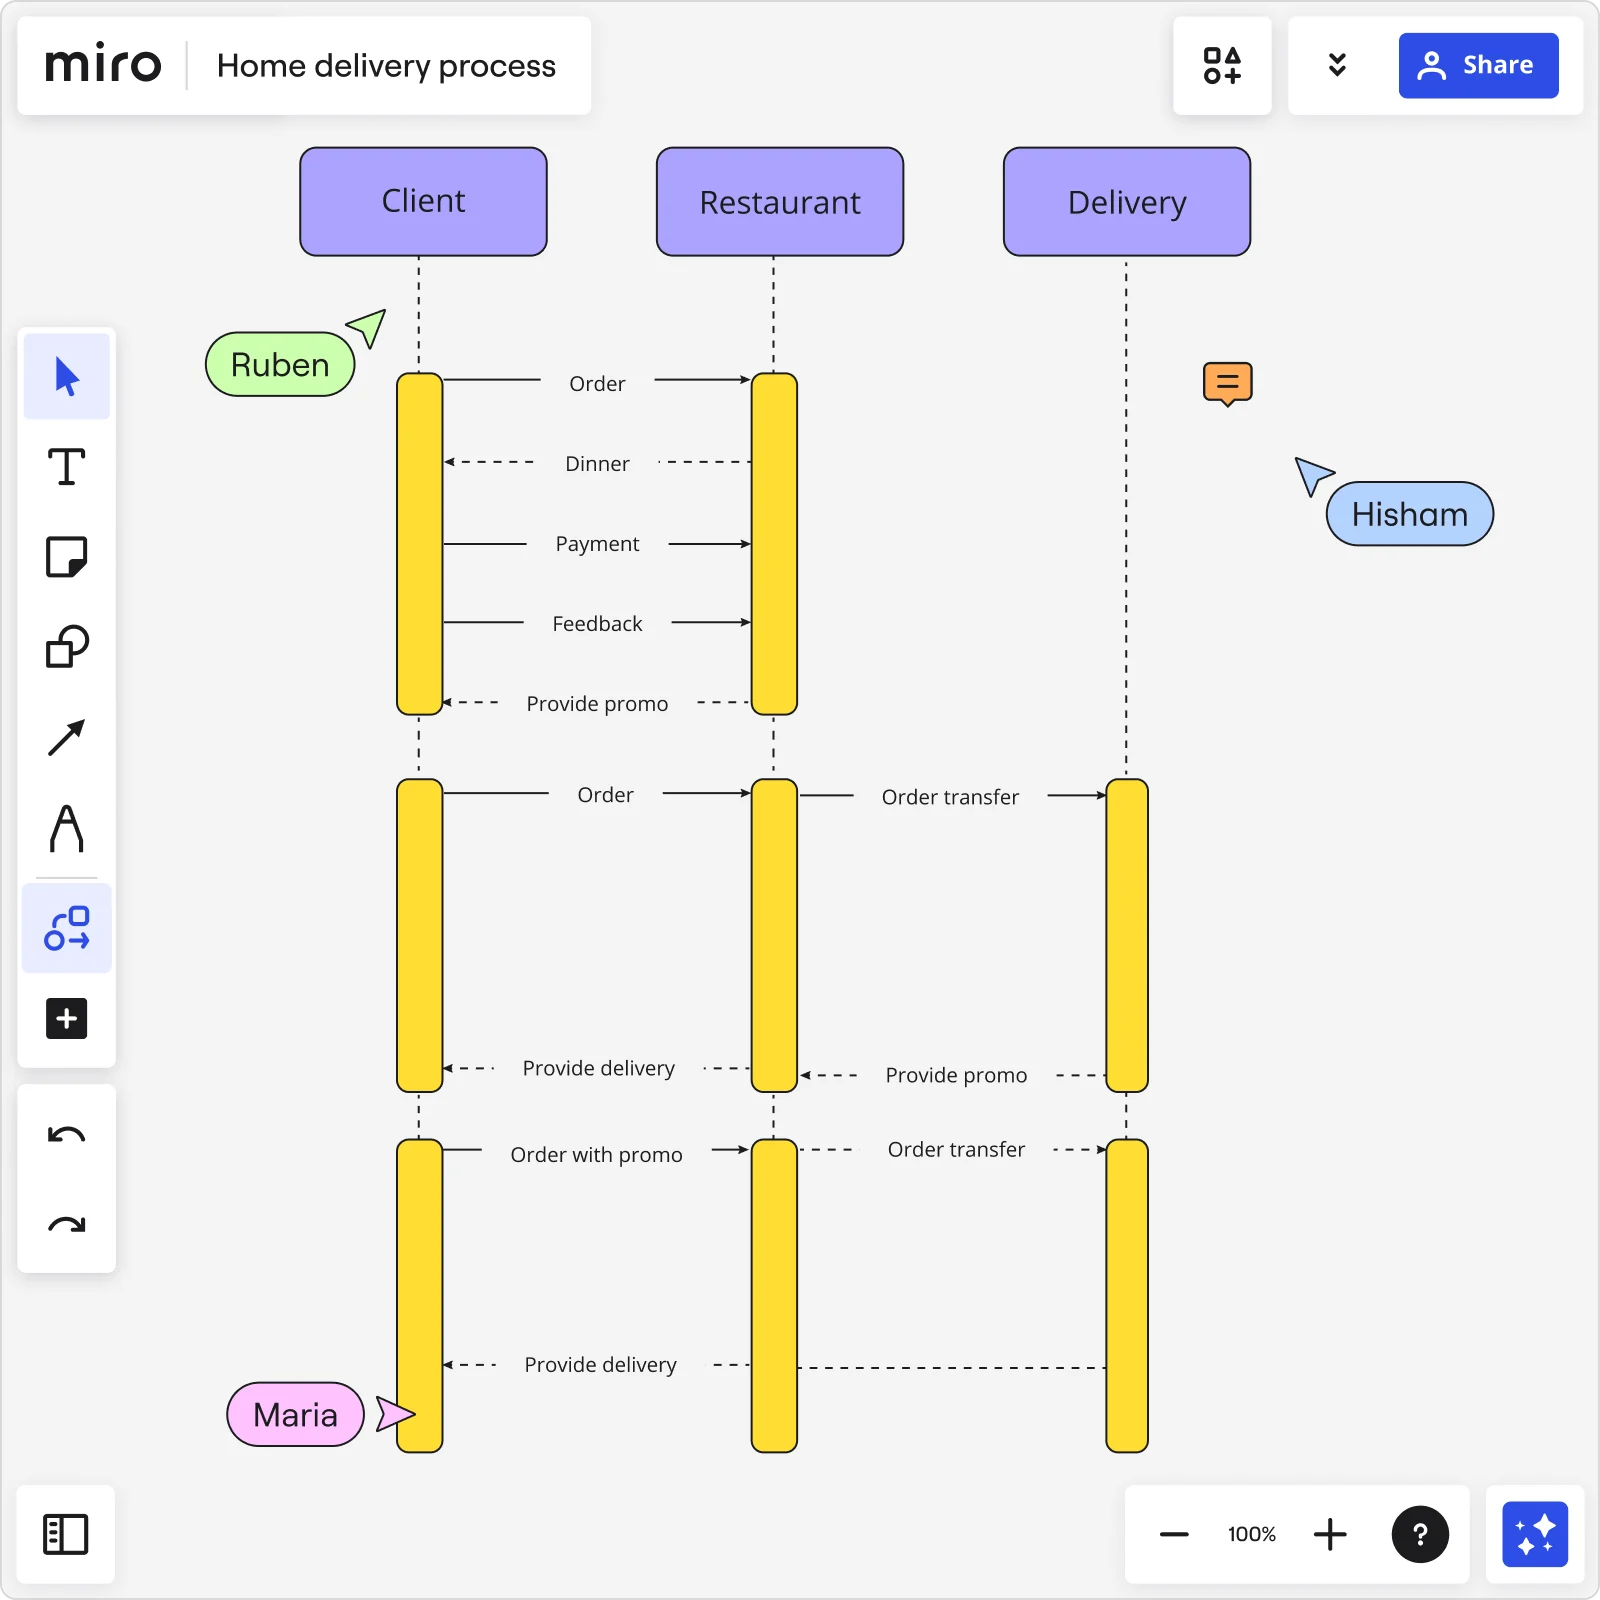 Image showing Miro's diagram creator used to map a home delivery process